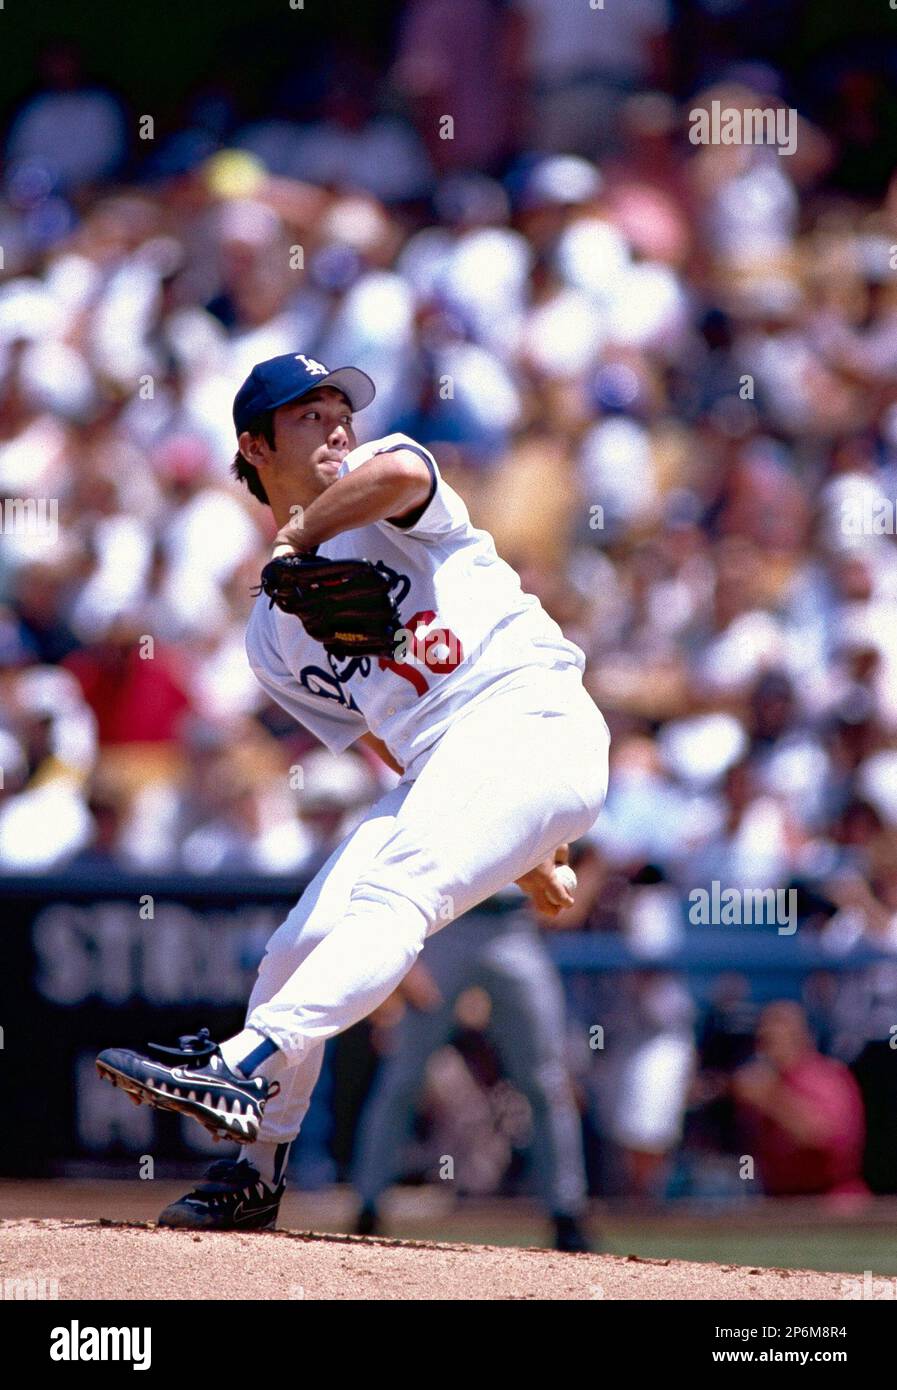 Hideo Nomo of the Los Angeles Dodgers during a game at Dodger